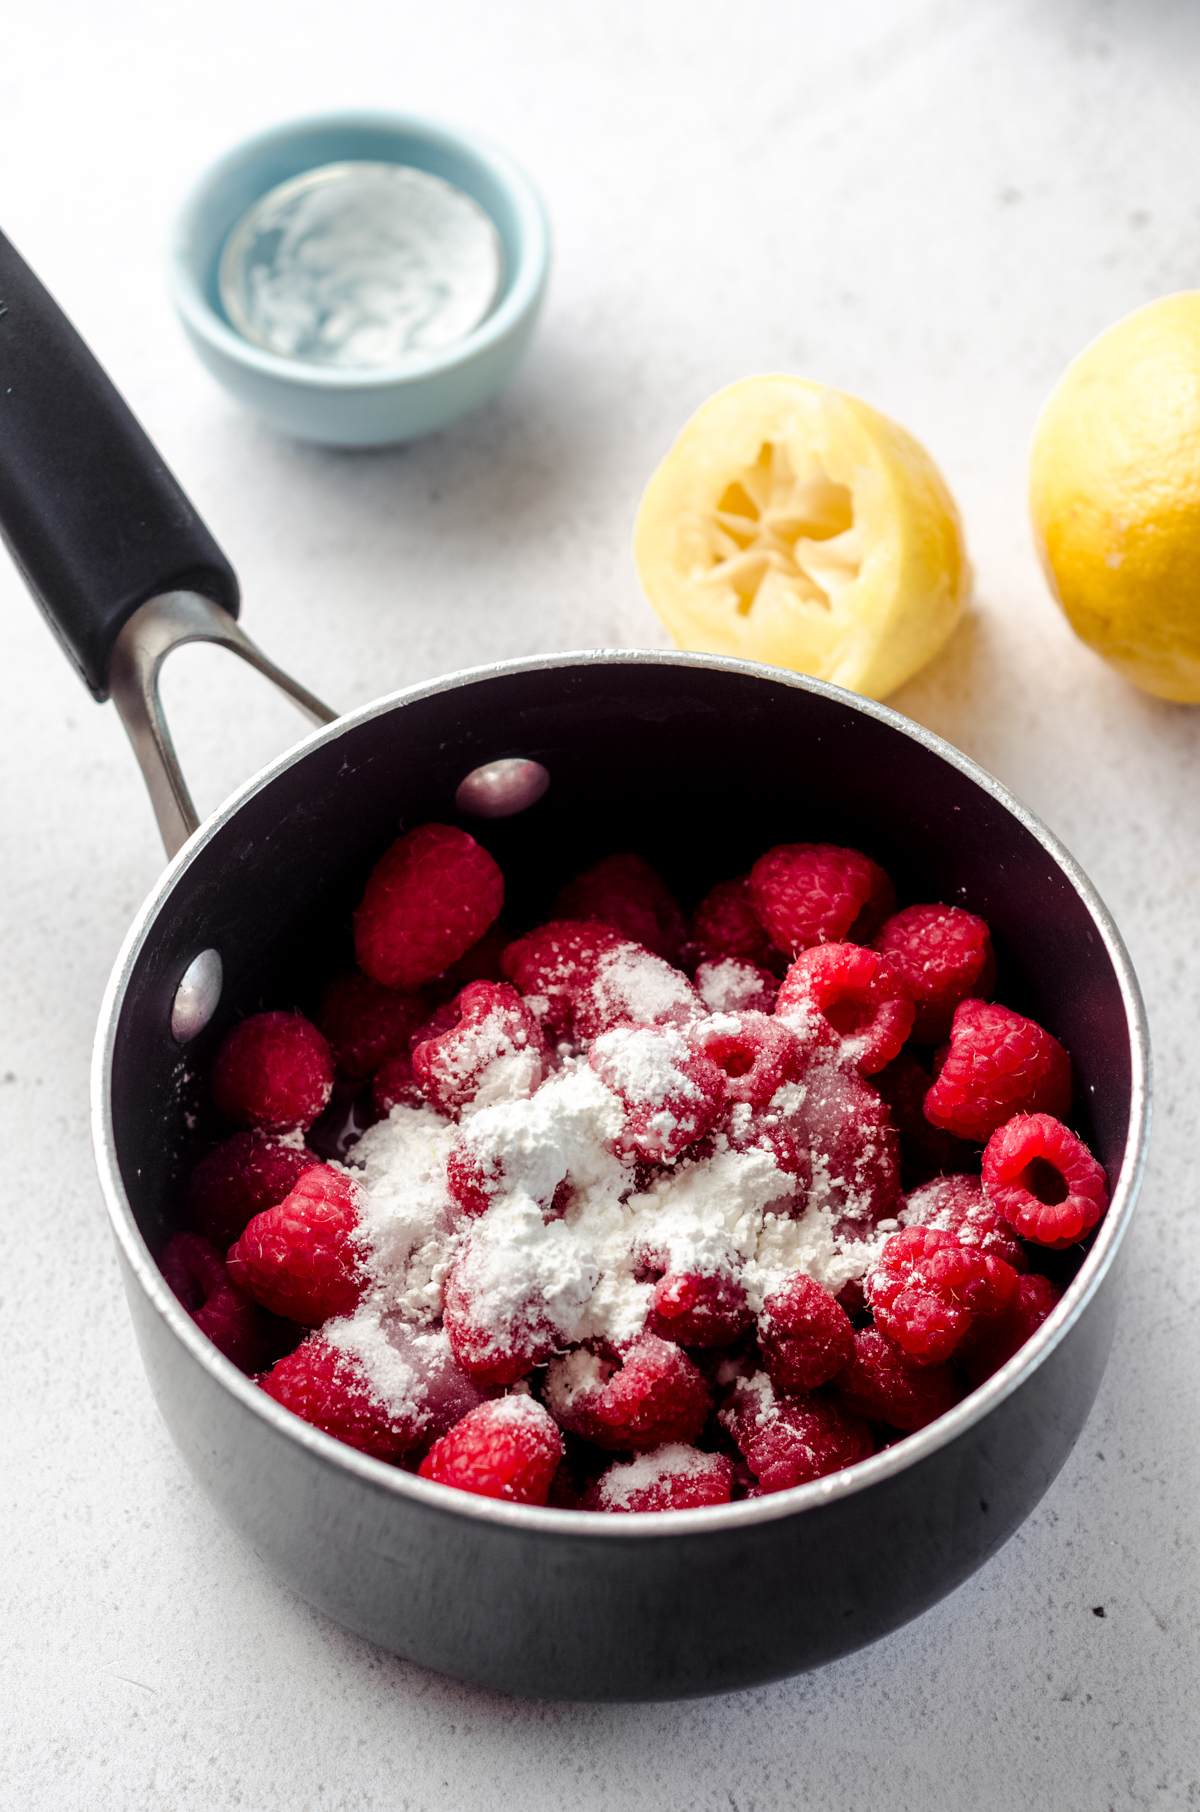 Ingredients for raspberry spread in a small saucepan.